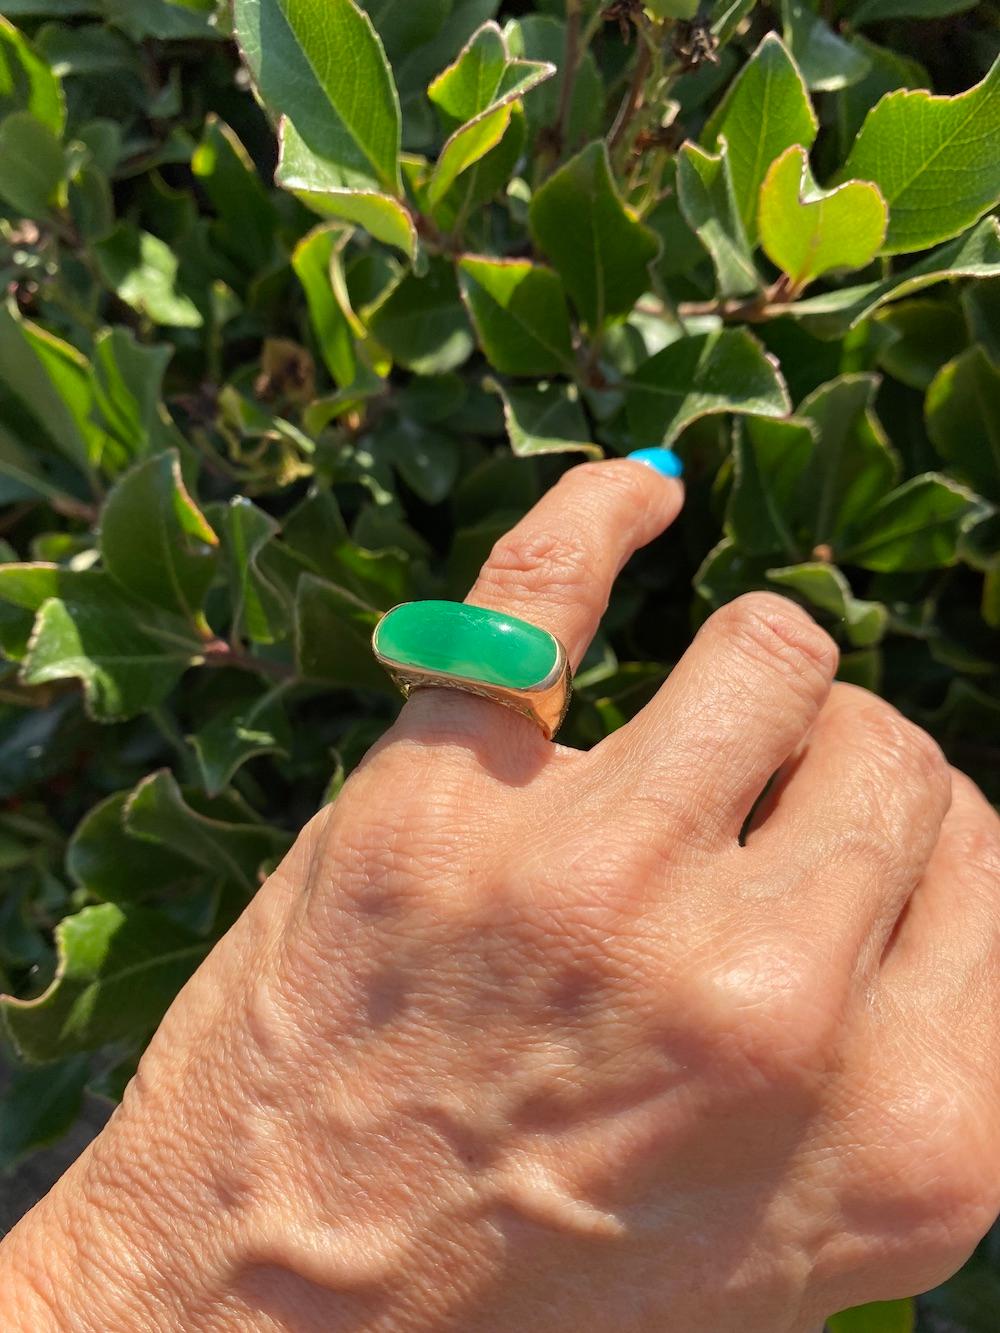 Jadeite Green Gold Ring Deep Color 9.30 x 24 mm Long Circa 1970's
14 karat yellow gold ring is set in a heavy, secure setting enclosed in gold. The shank measures 9-6mm at the rings back.
The Jade is a desirable color with deep transparency

The